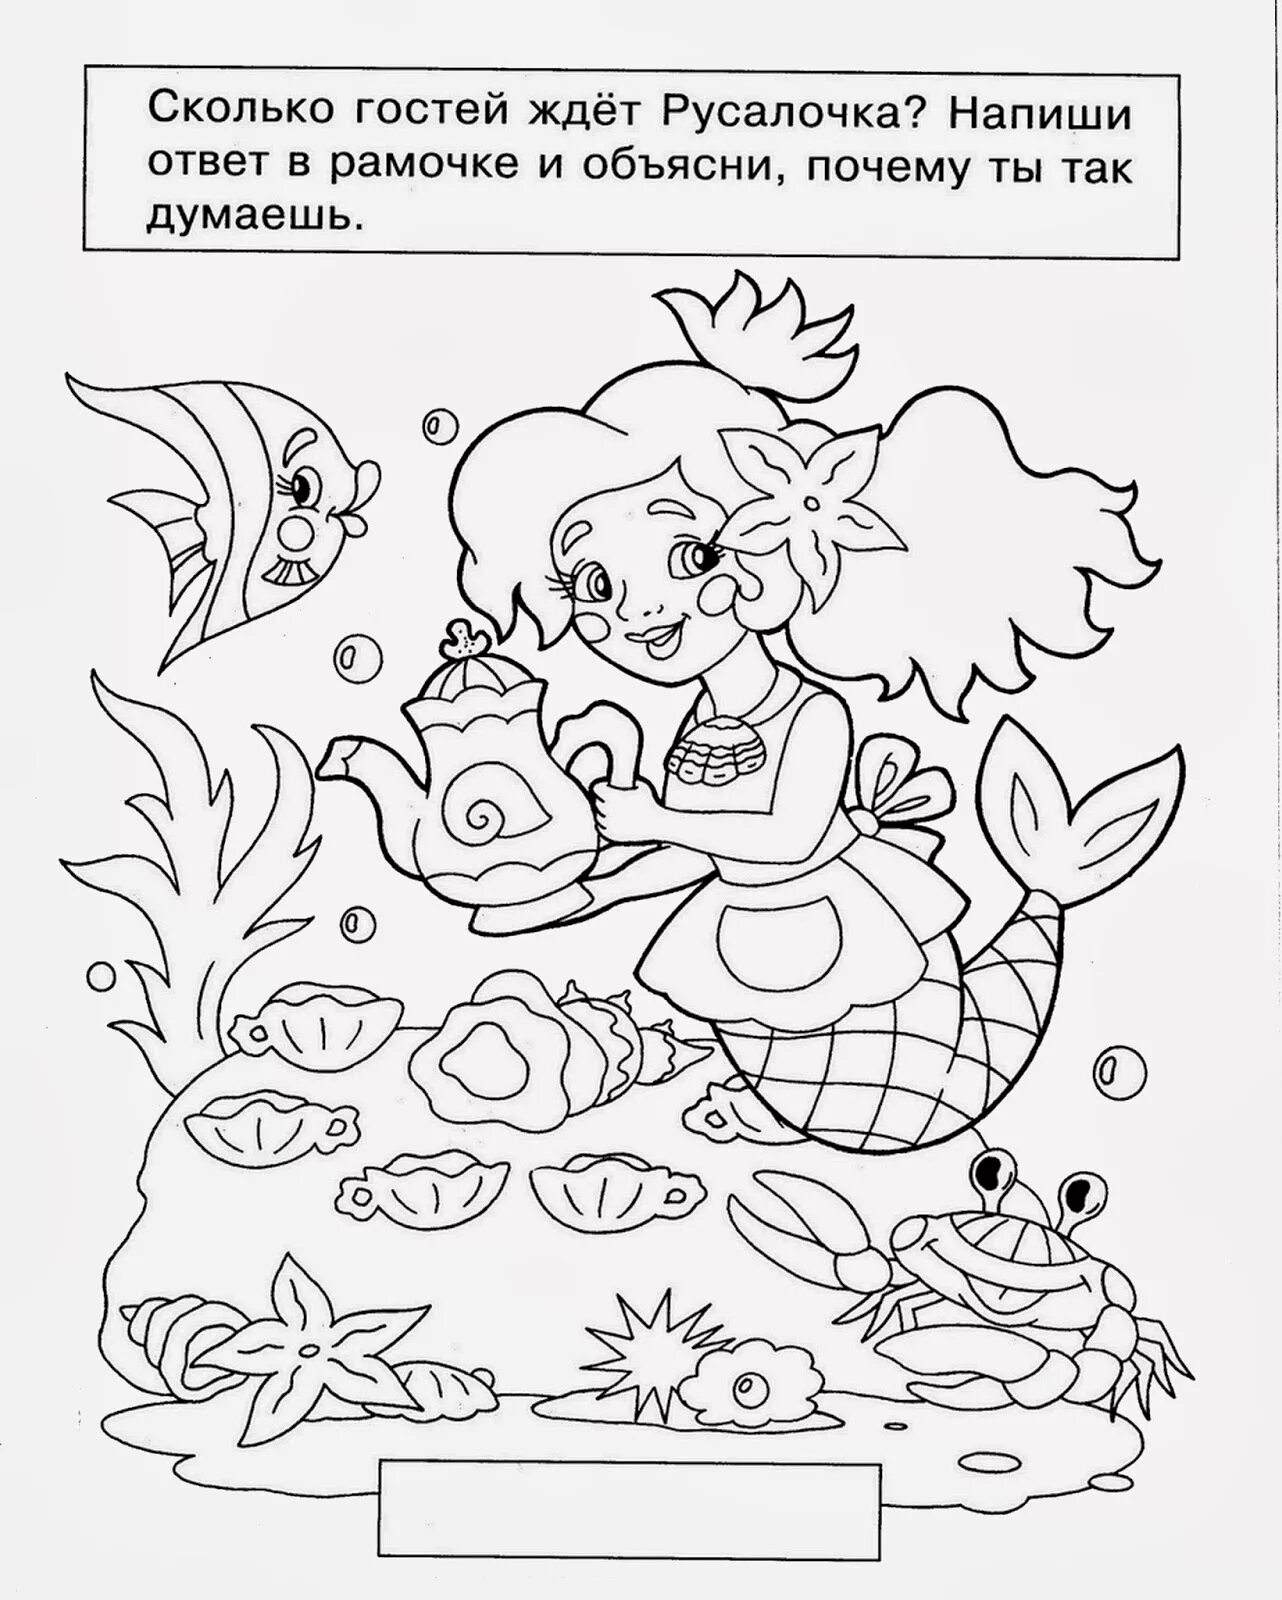 Inspirational educational coloring book for girls 5-6 years old